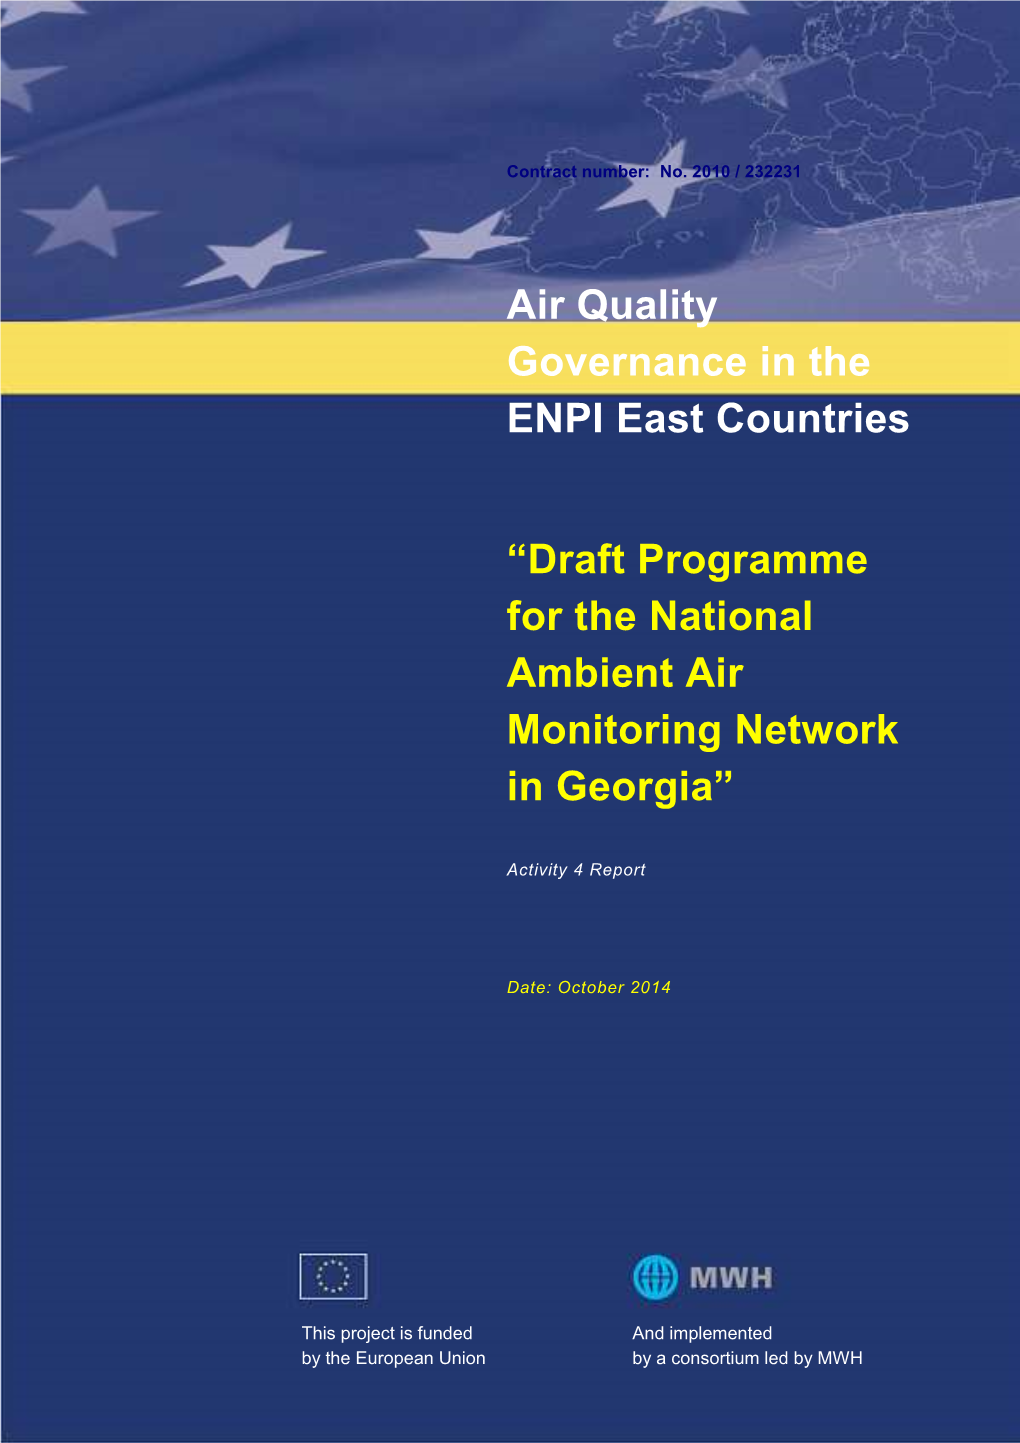 Draft Programme for the National Ambient Air Monitoring Network in Georgia”